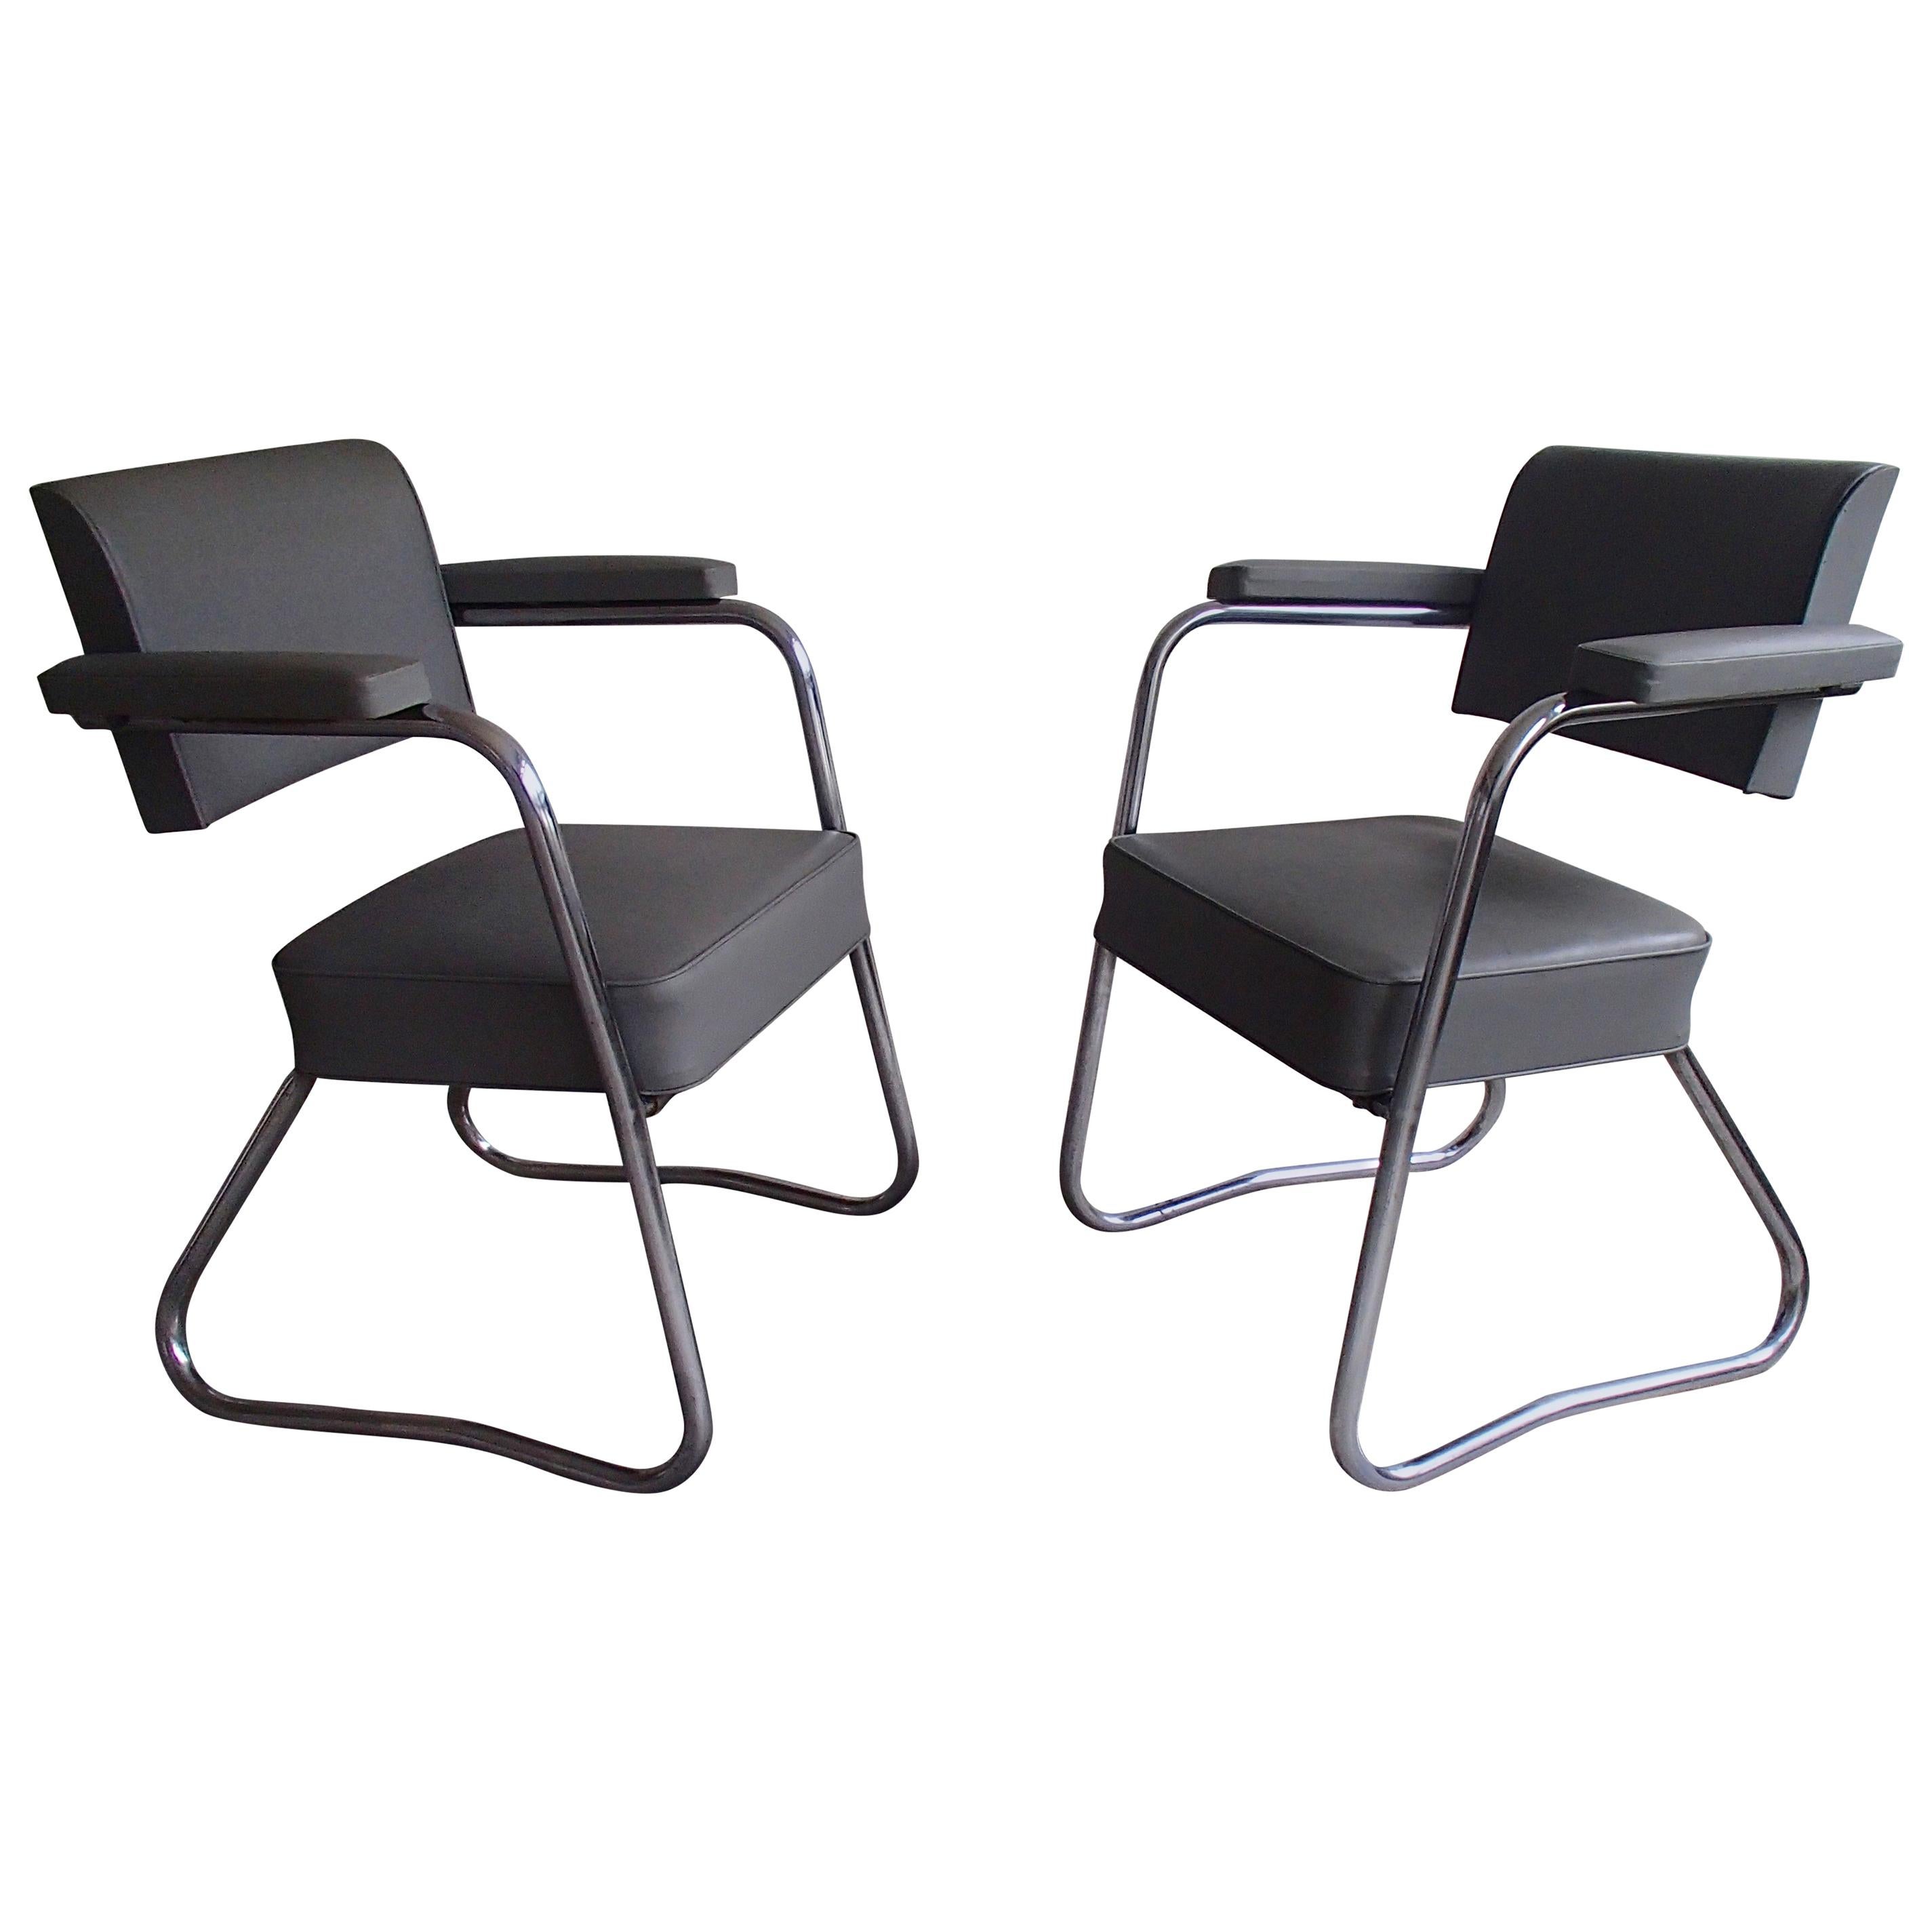 Pair of Industrial Bauhaus Armchairs Chrome and Grey Leatherette